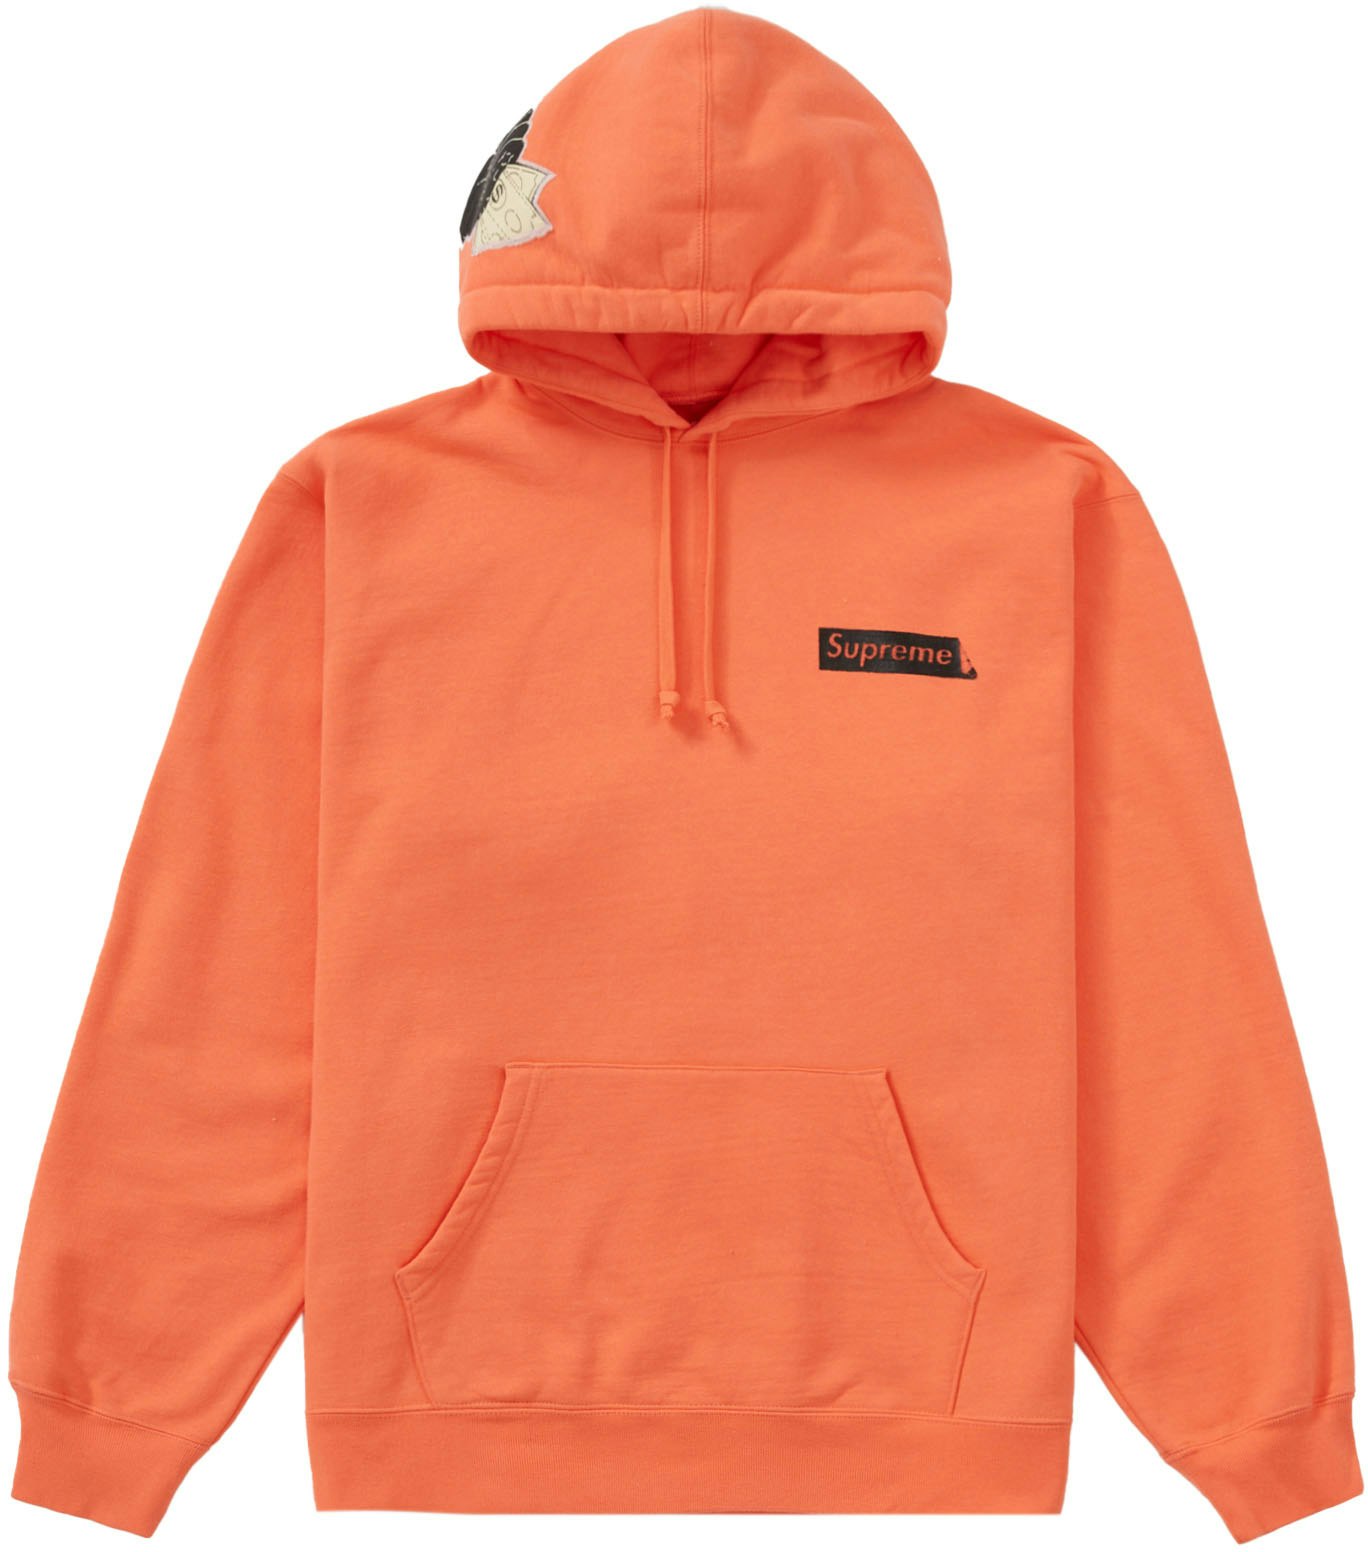 Supreme Instant High Patches Hooded Sweatshirt 'Apricot' - Novelship